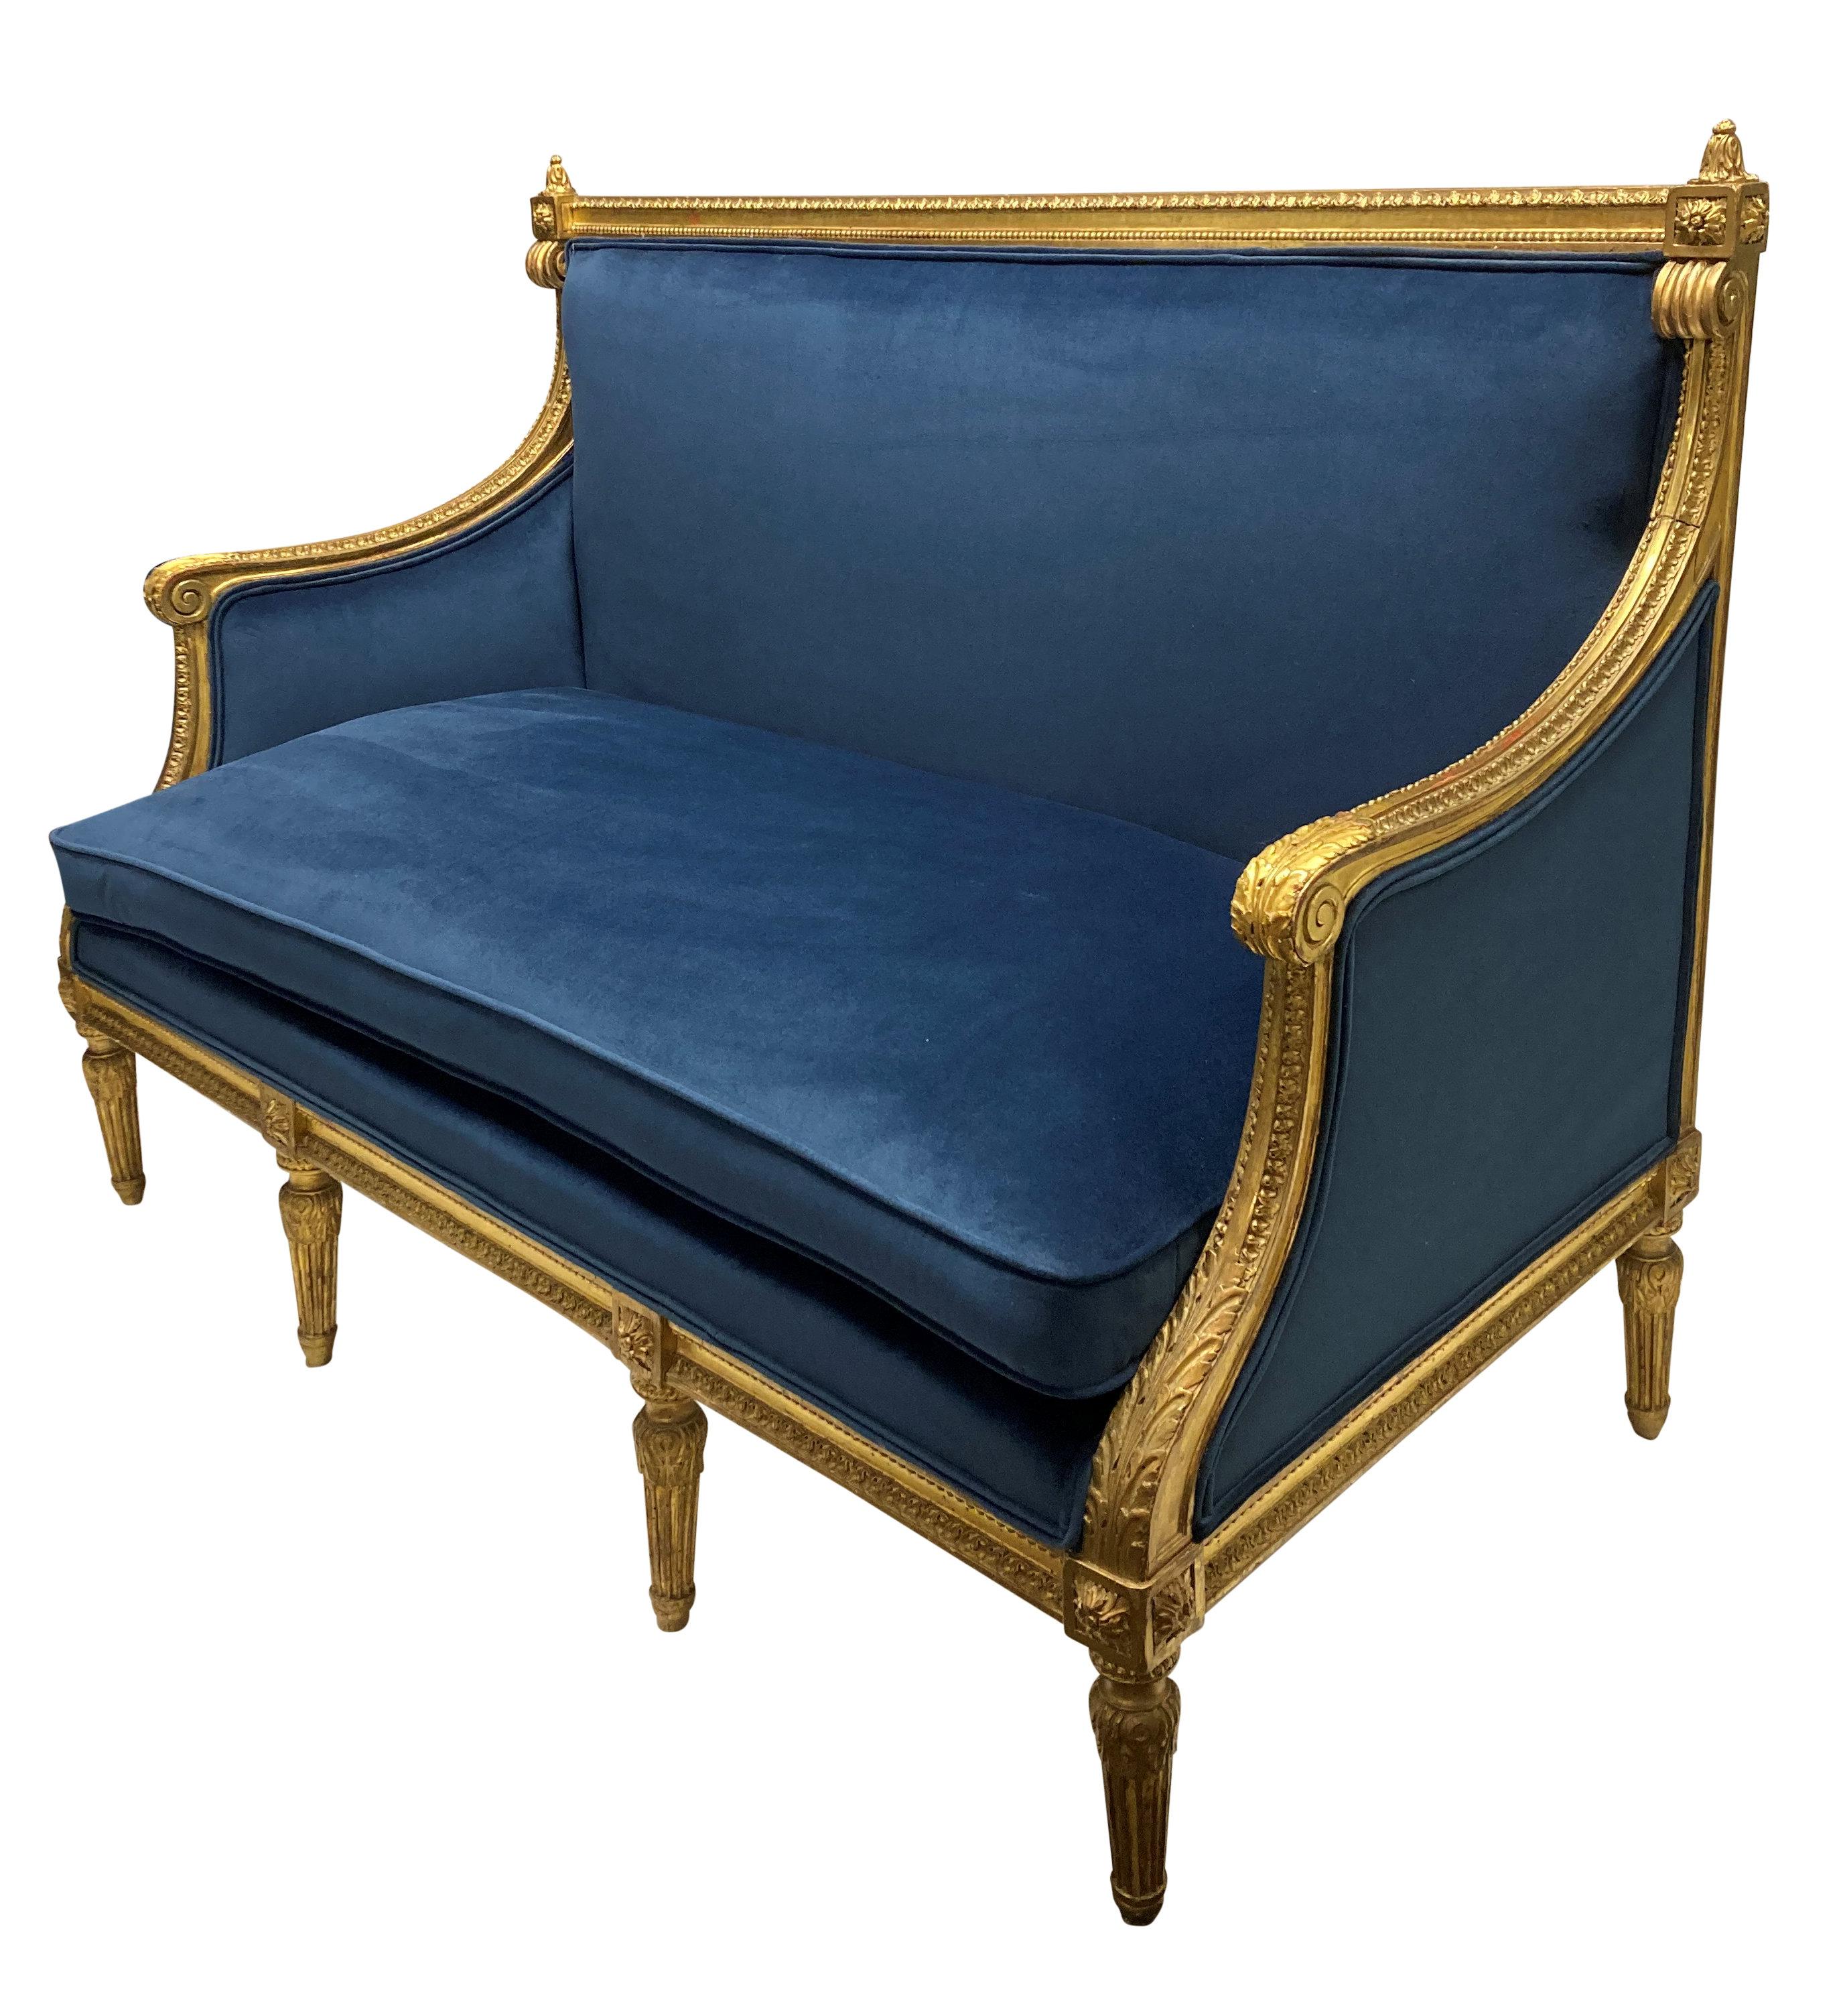 A fine French Louis XVI style carved giltwood settee, water gilded and newly upholstered in blue velvet.